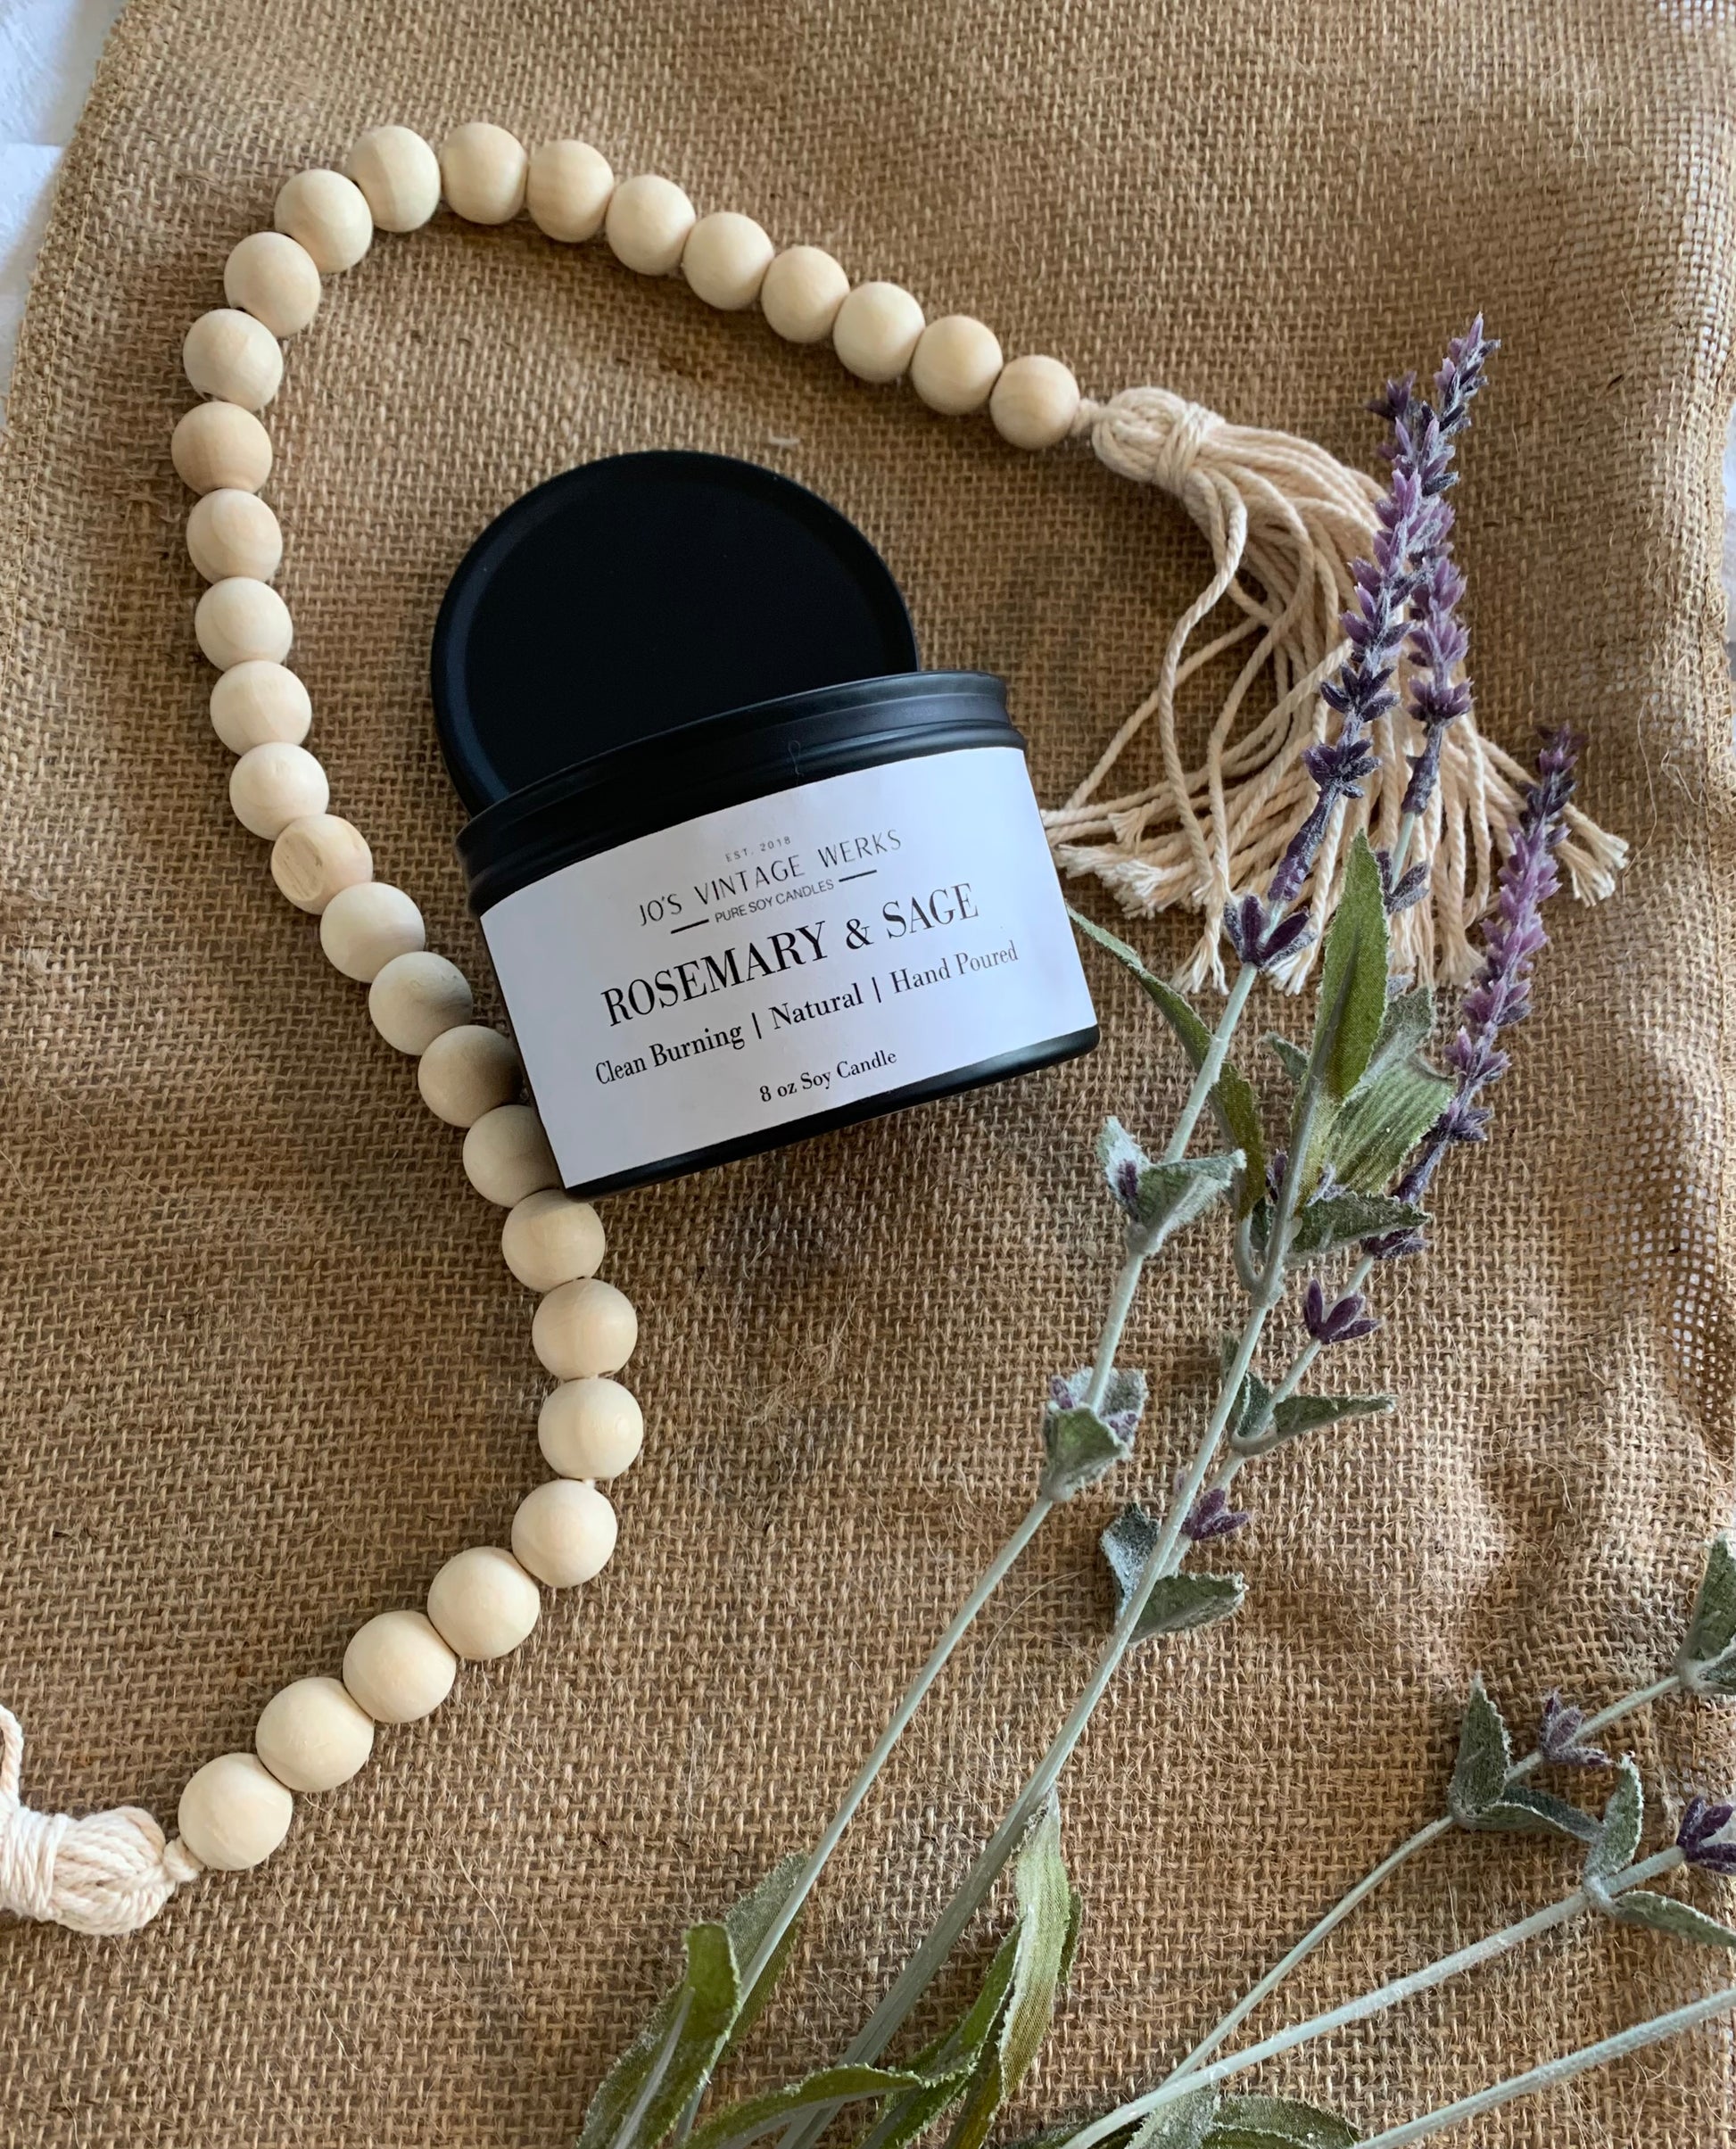 Rosemary & Sage Soy Candle - Jo’s Vintage Werks